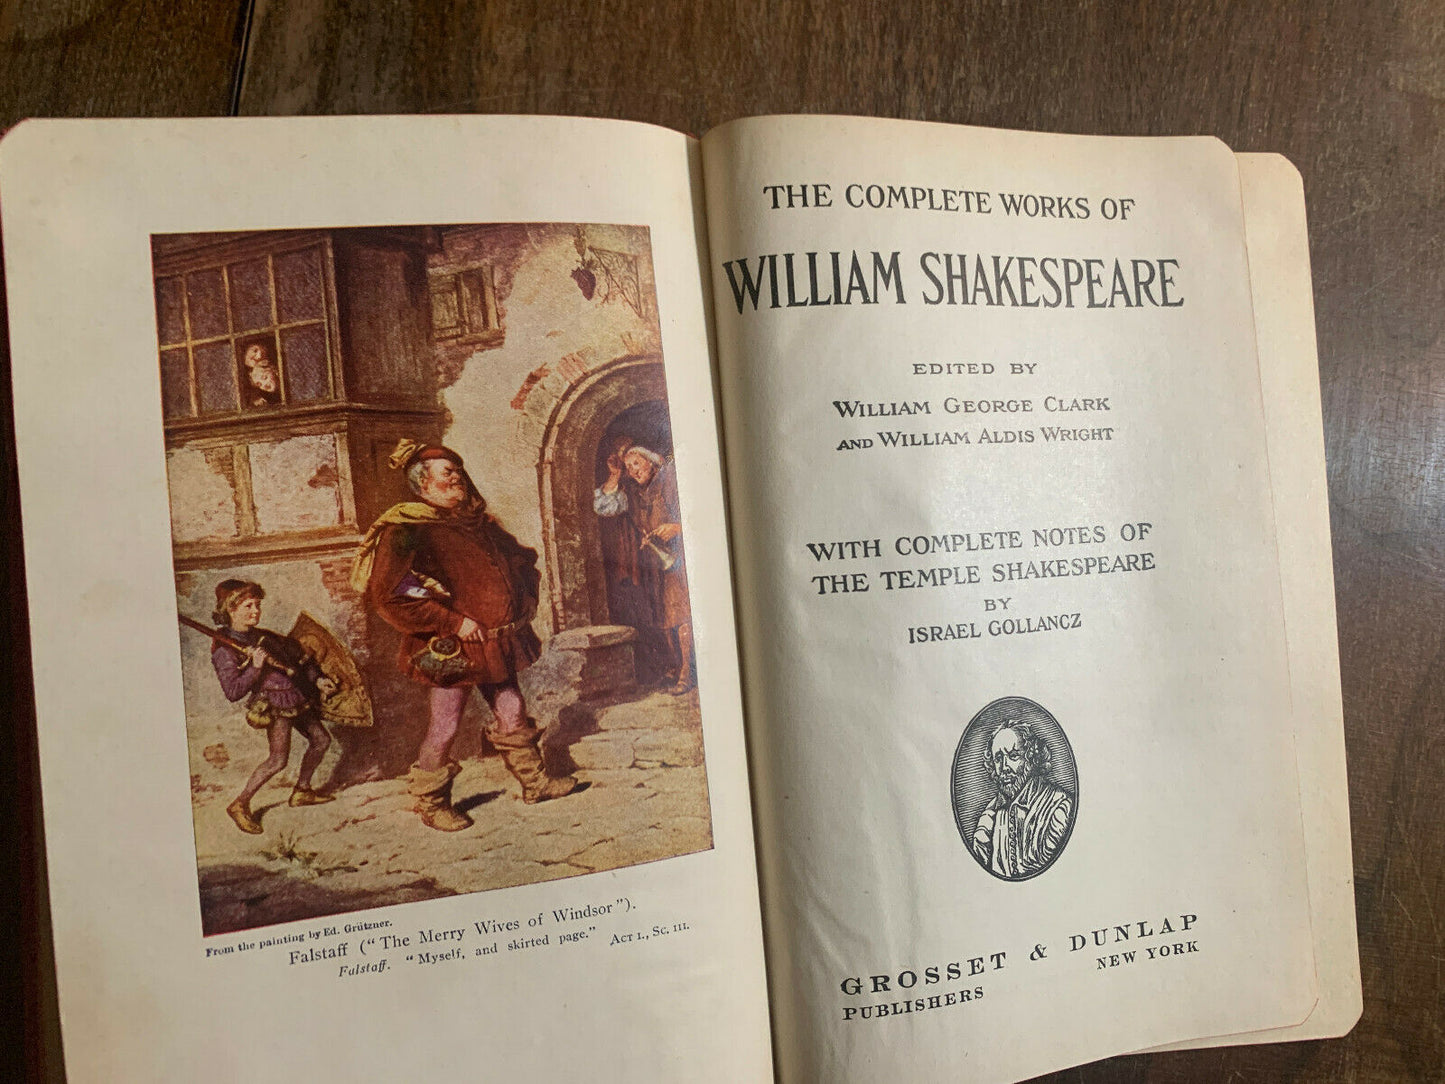 Shakespeare Complete Works w/ Notes by Israel Gollancz (Z1)